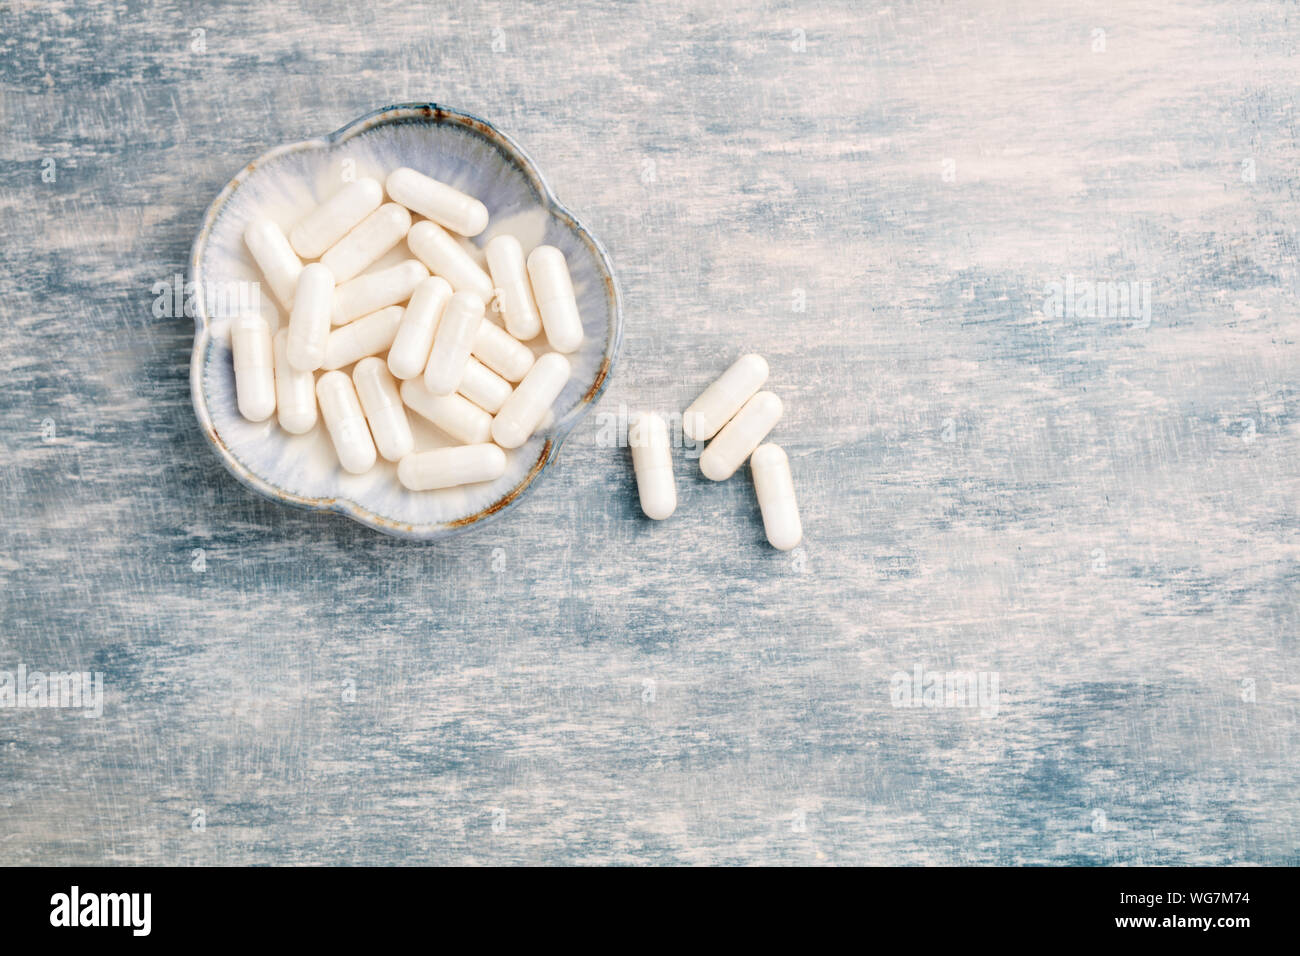 Glycine capsules. Concept for a healthy dietary supplementation. Nervous System Support. Bright wooden background. Top view. Copy space. Stock Photo